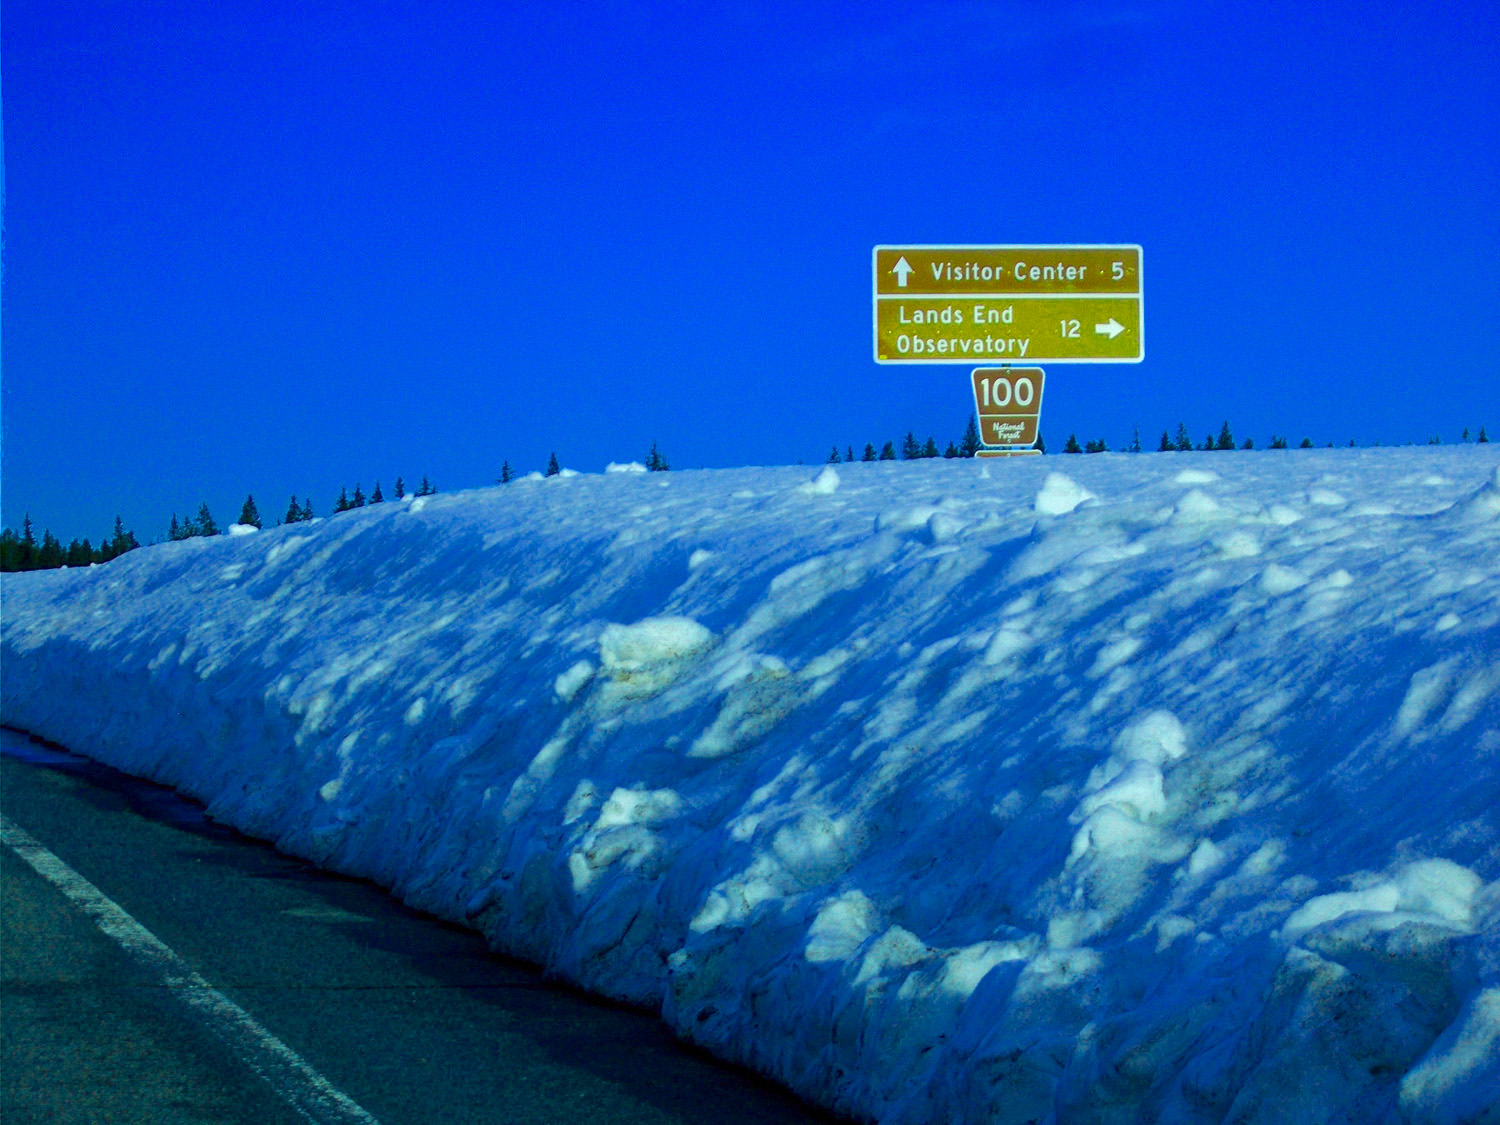 Road Closed by Snow